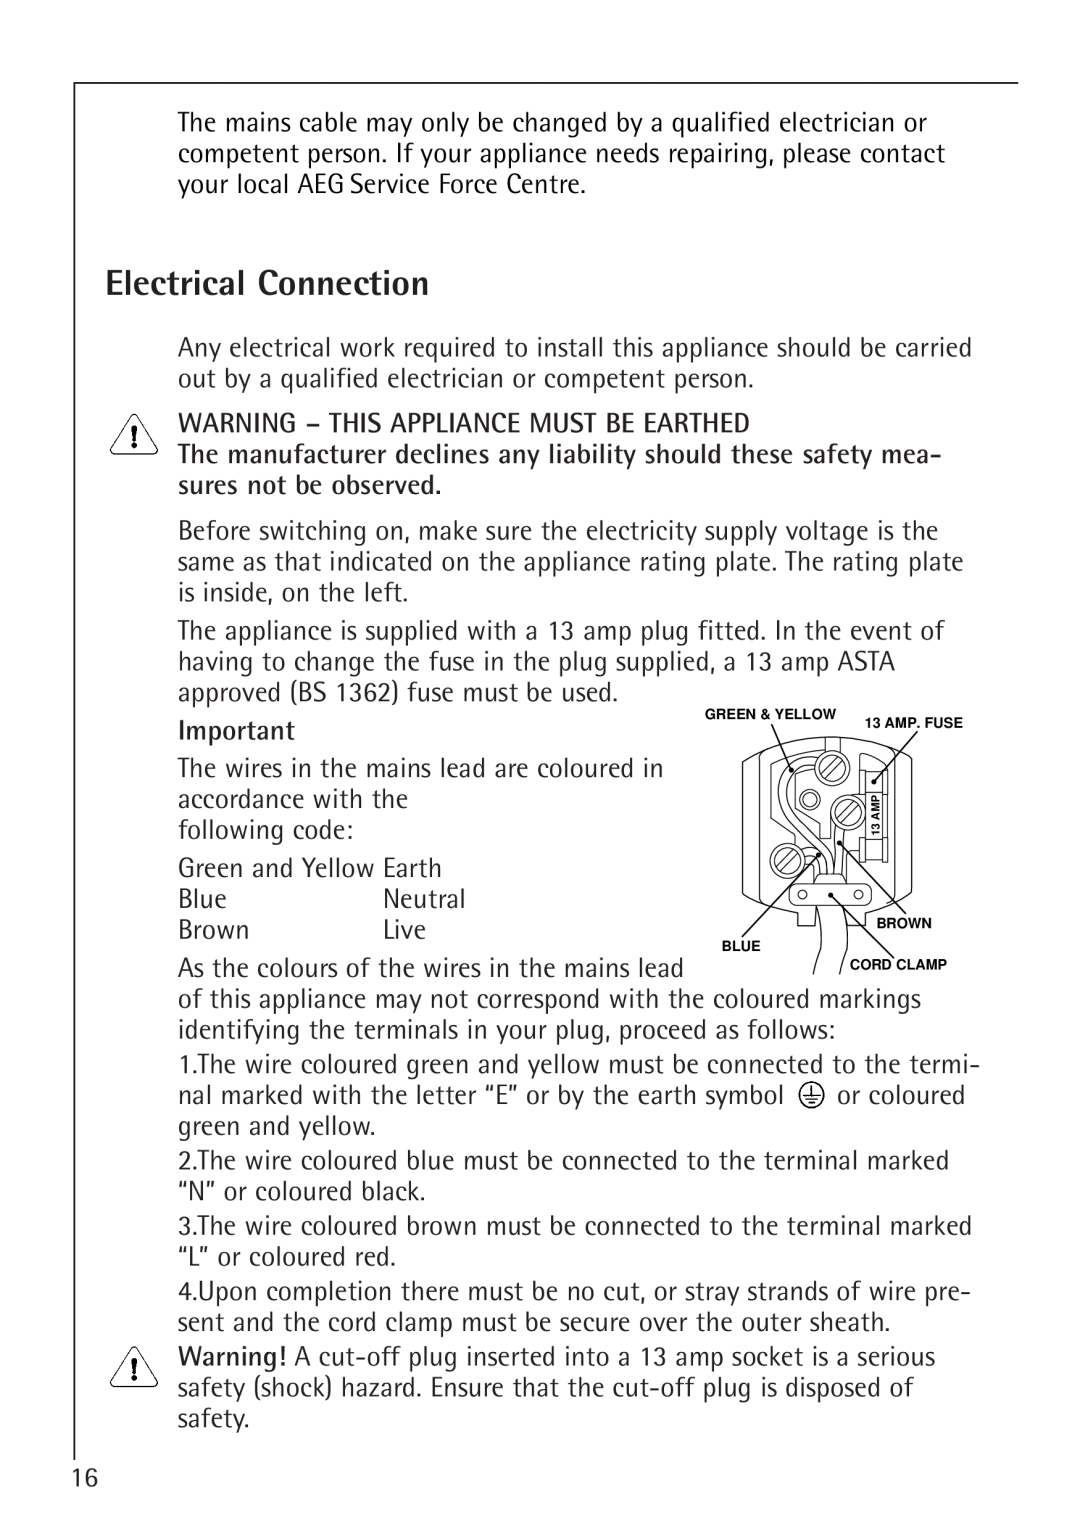 Electrolux 66050i installation instructions Electrical Connection, Warning - This Appliance Must Be Earthed 